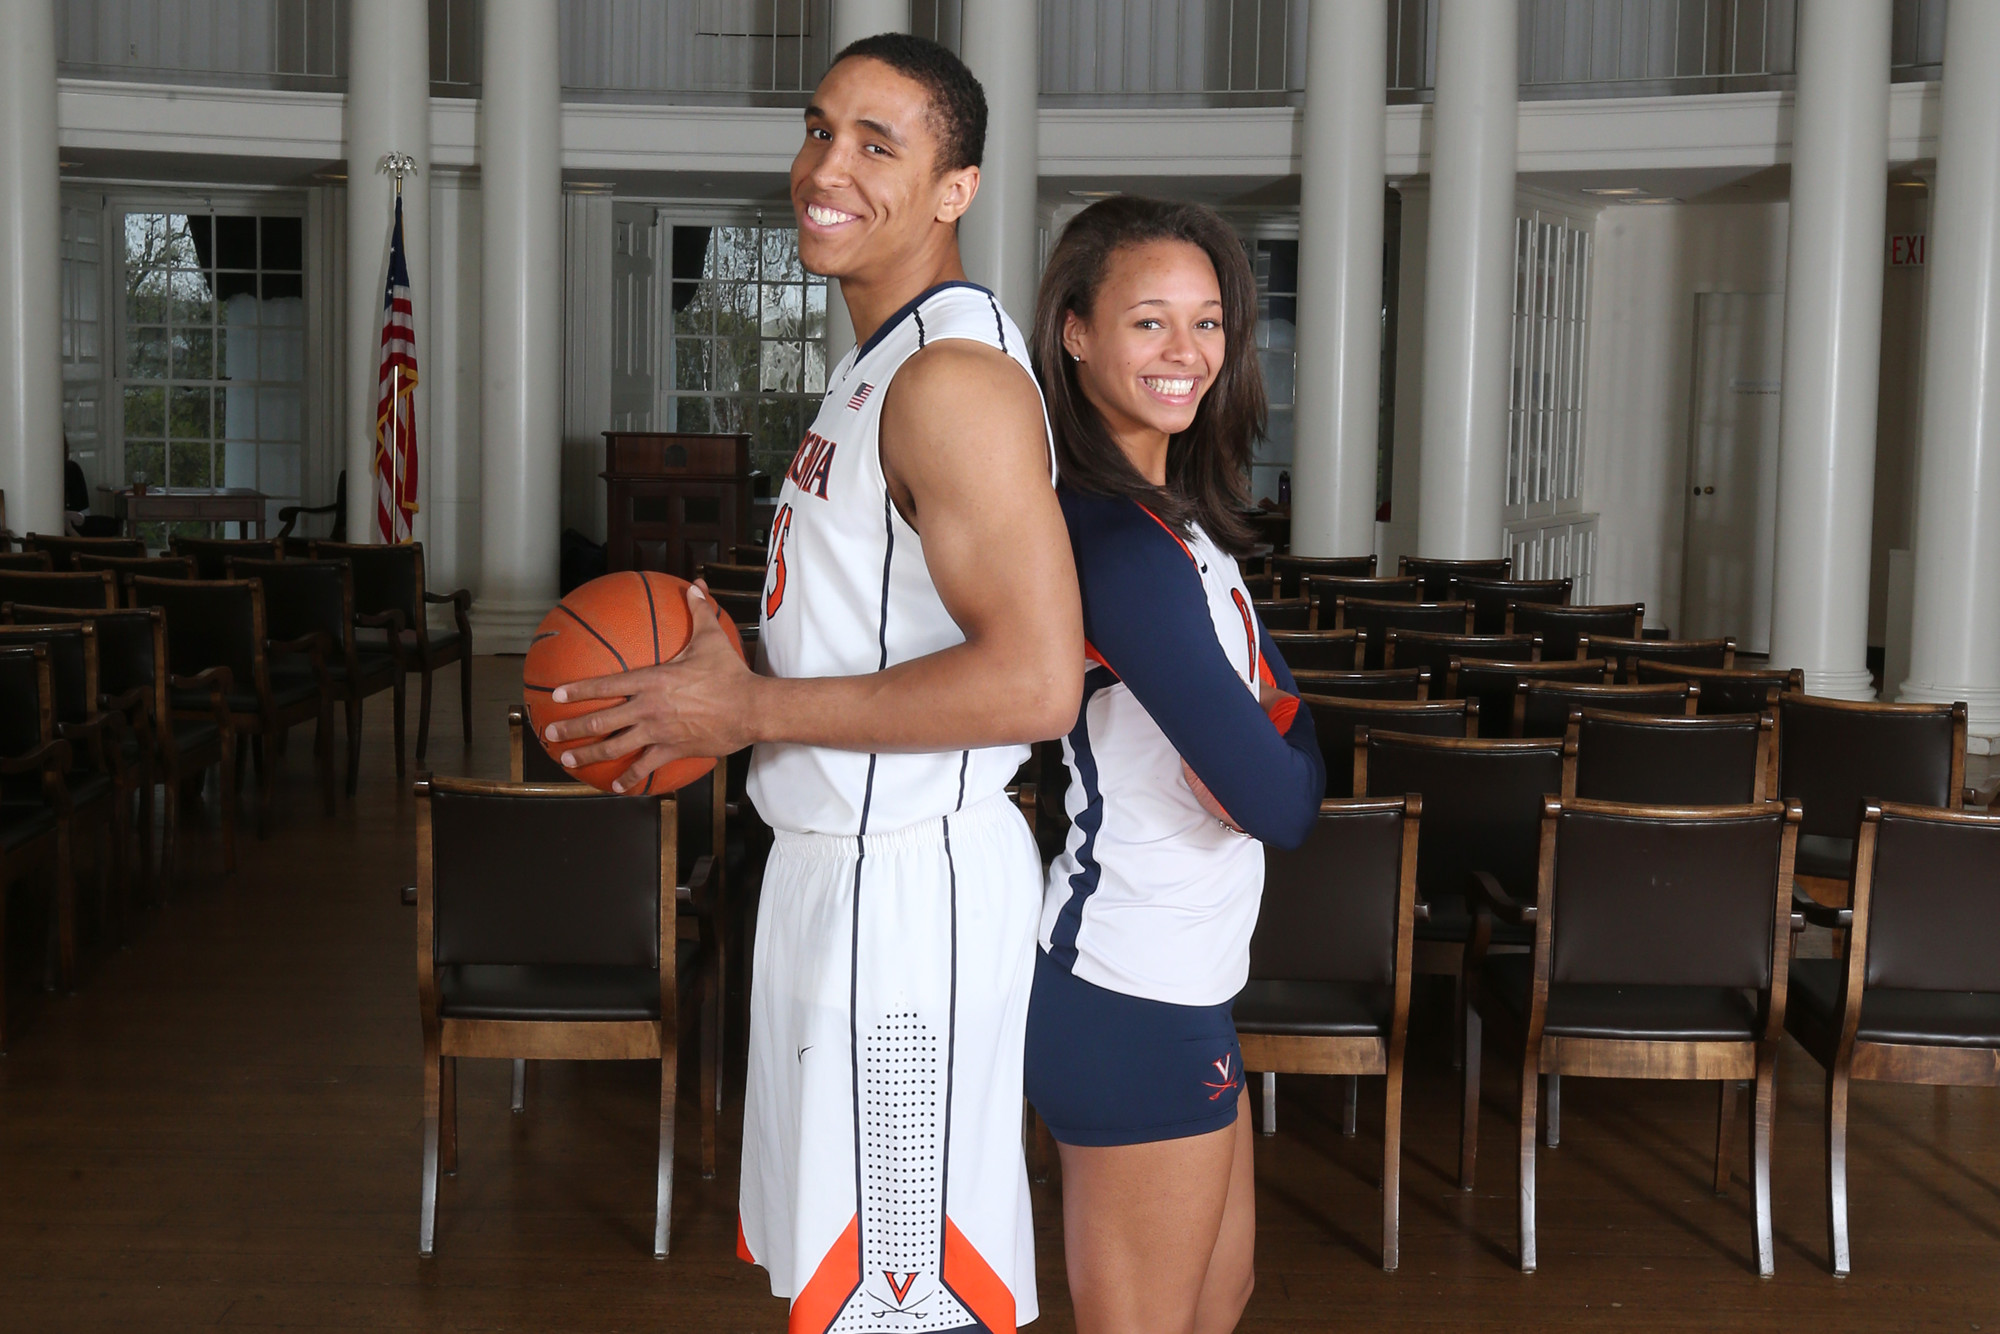 Brogdon and Janowski stand back to back smiling at the camera